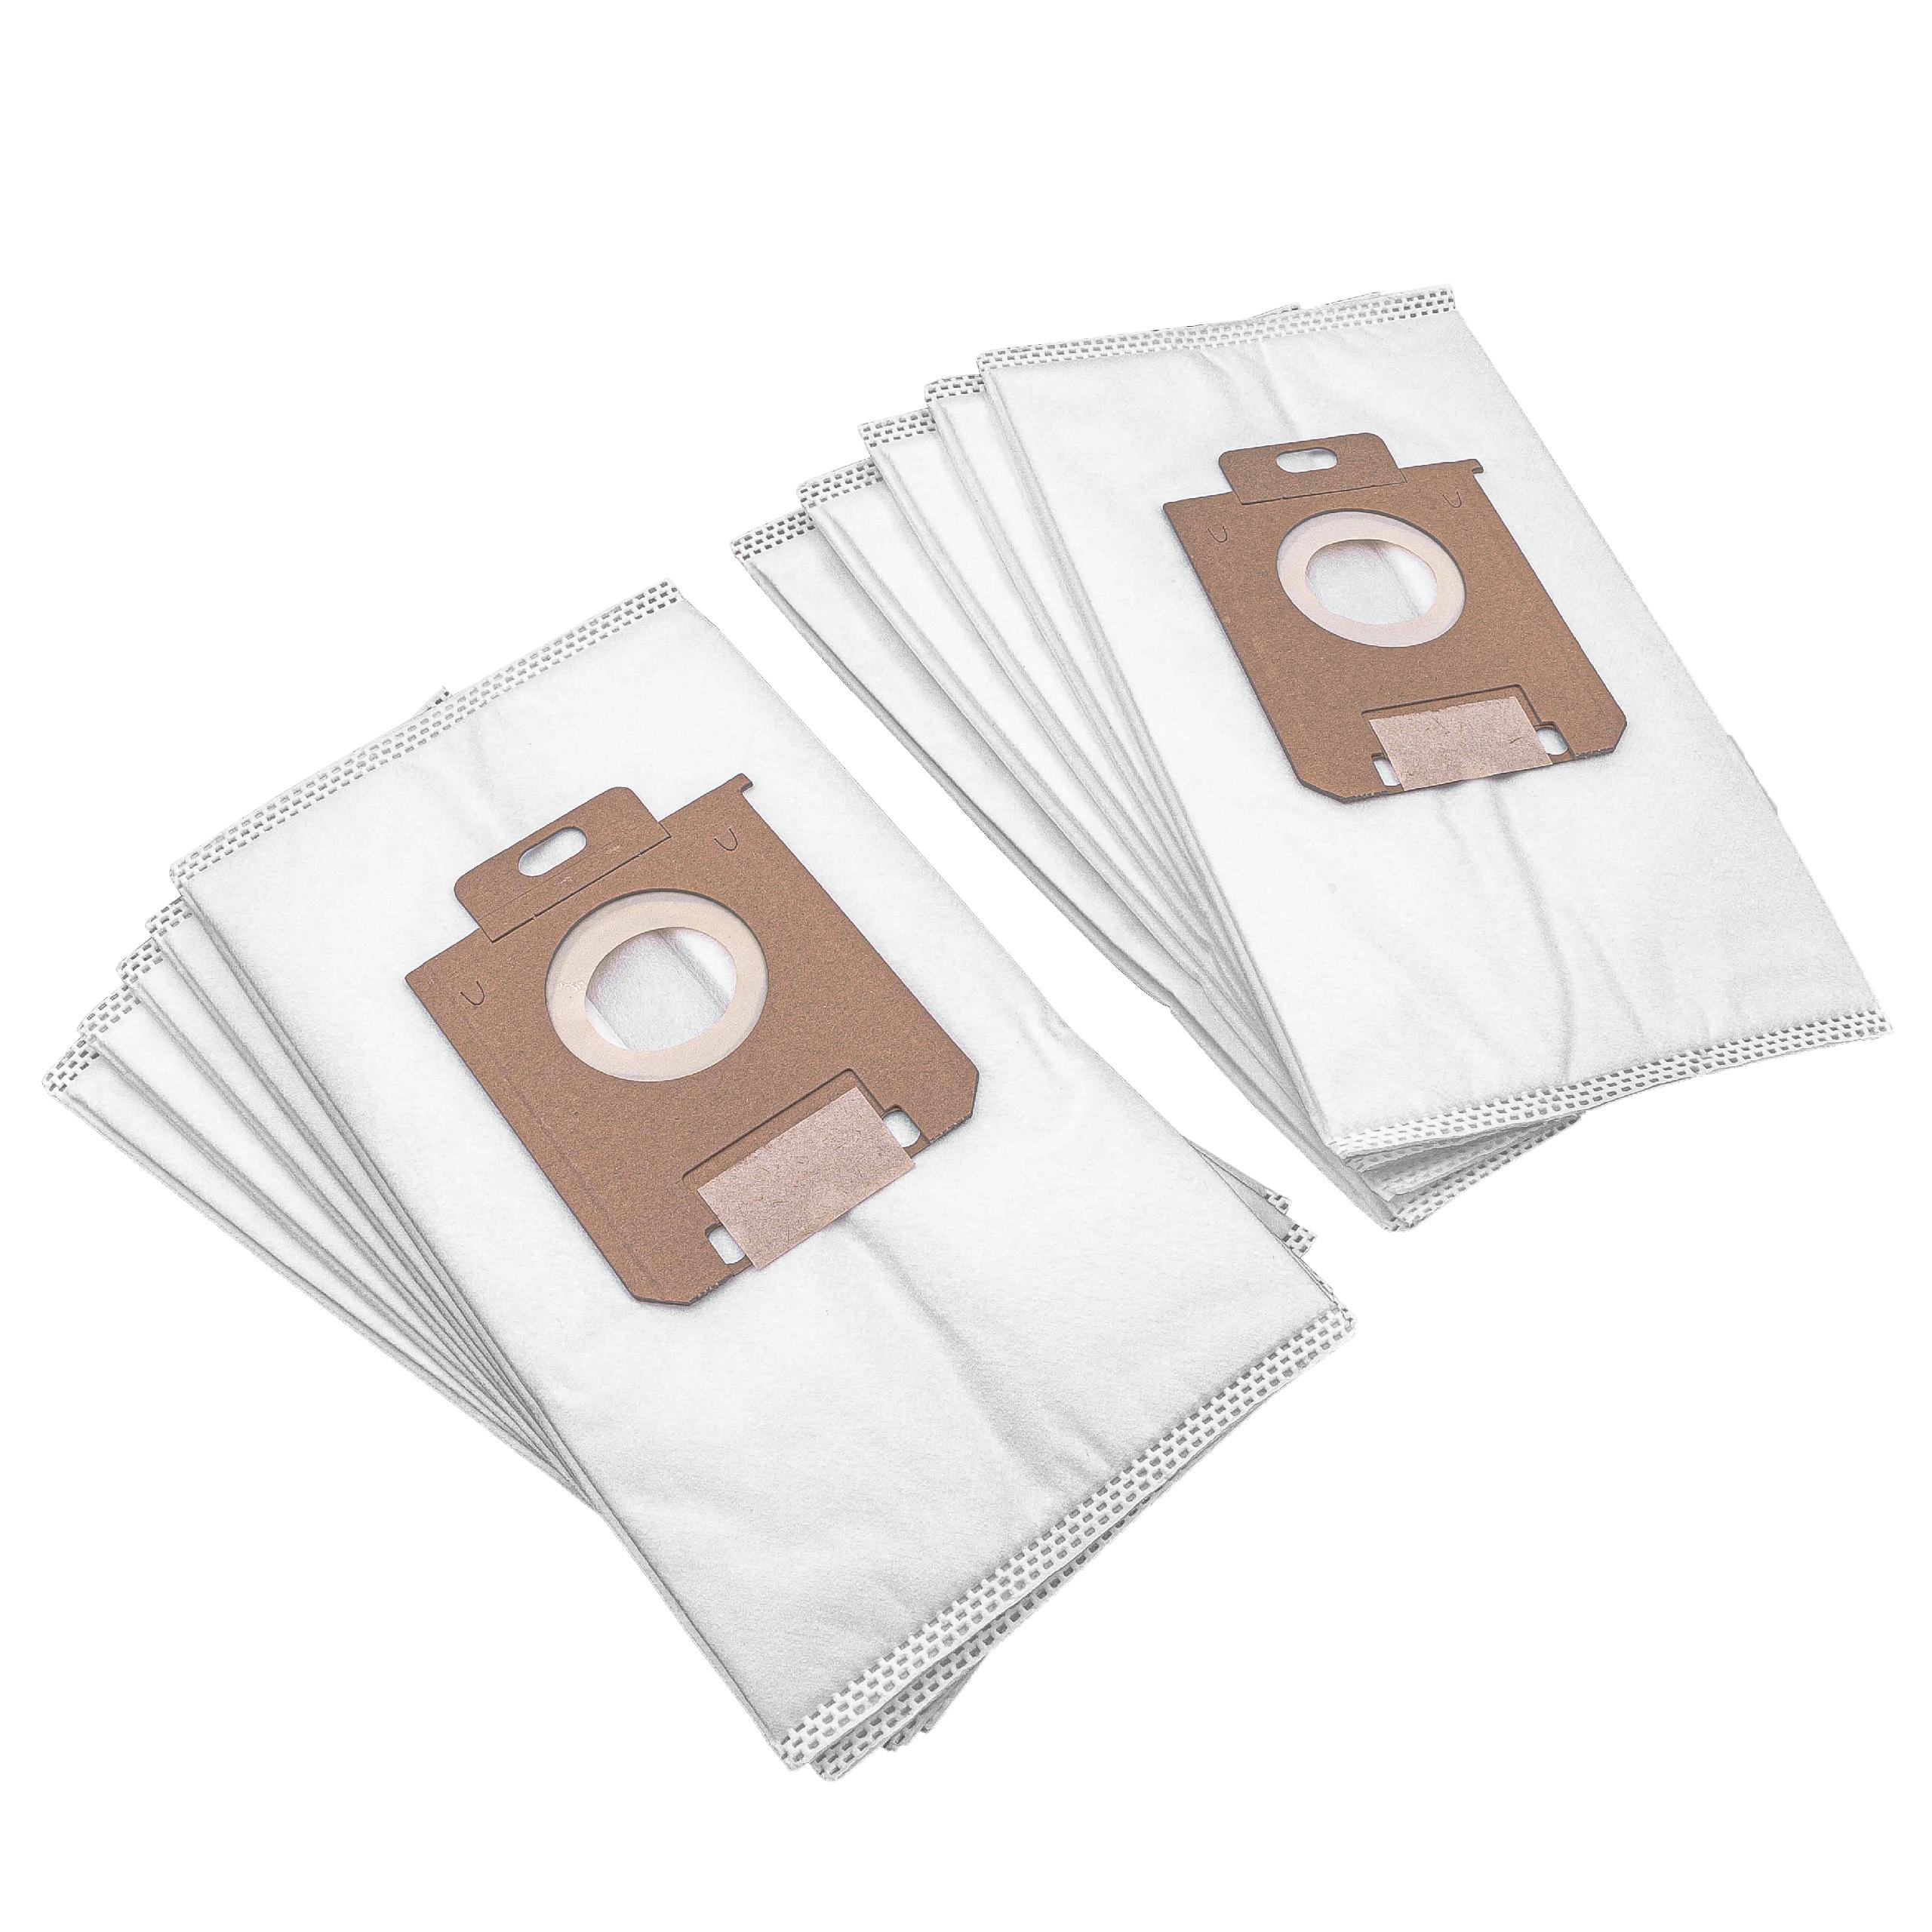 10x Vacuum Cleaner Bag replaces Phillips S Bag for - microfleece